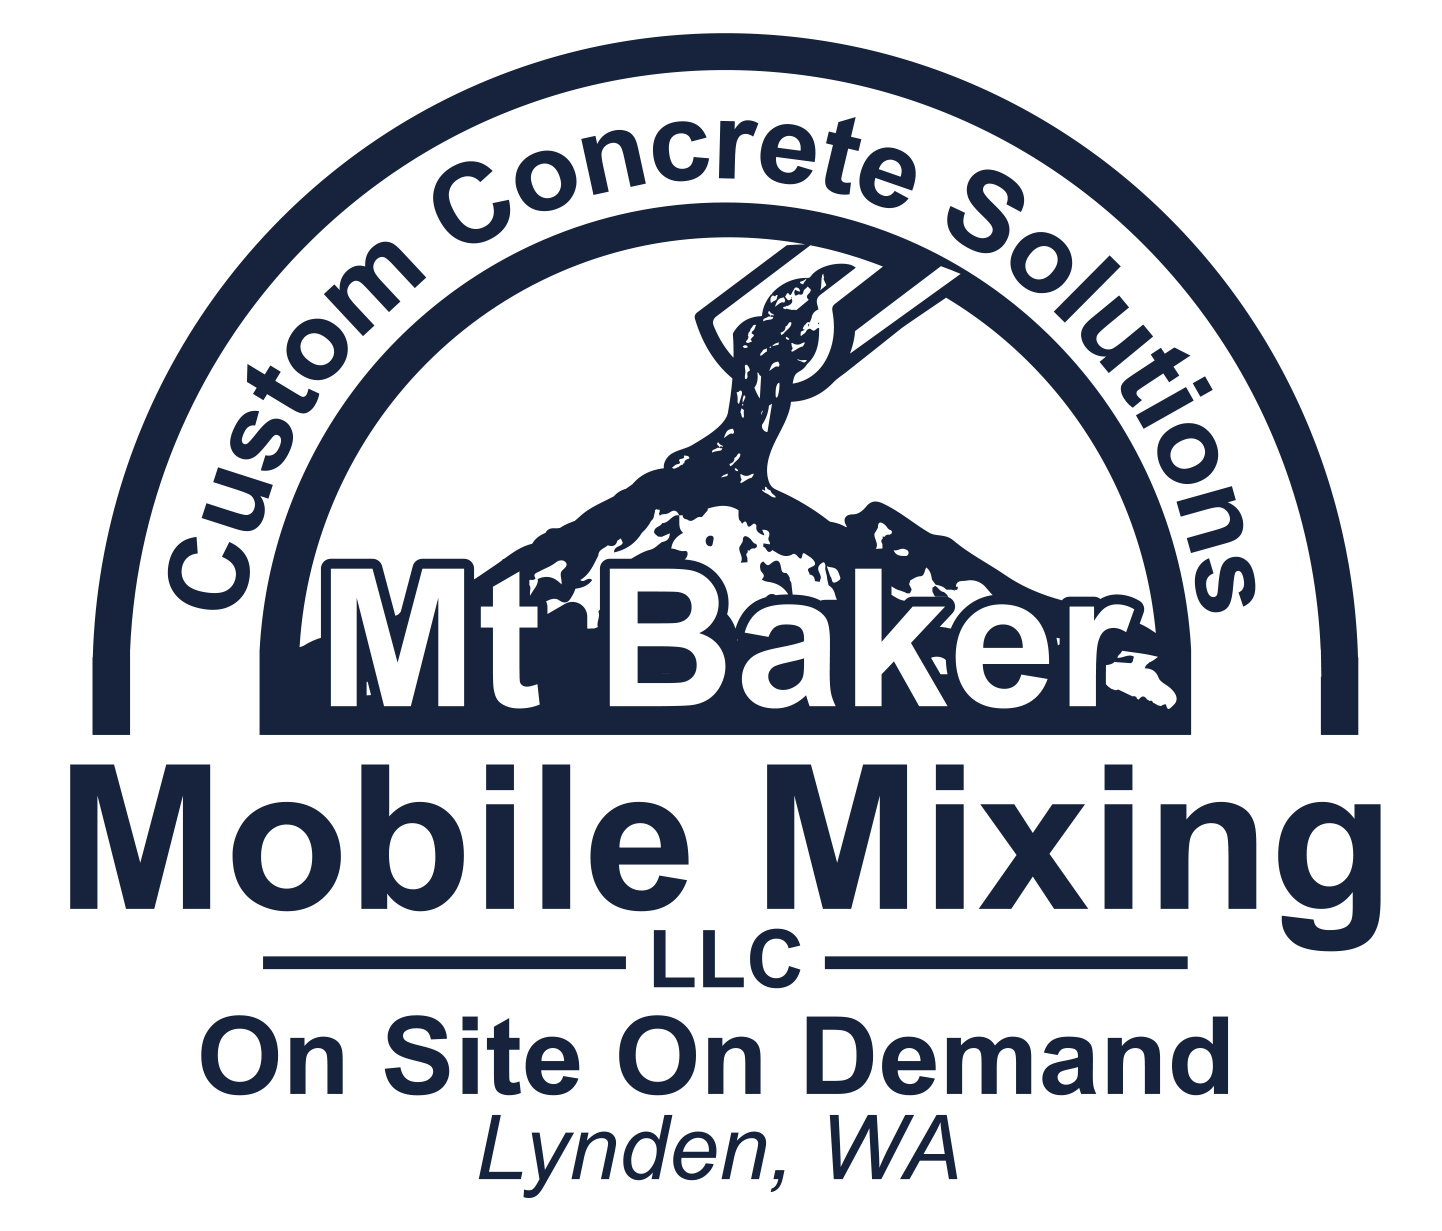 Mt Baker Mobile Mixing